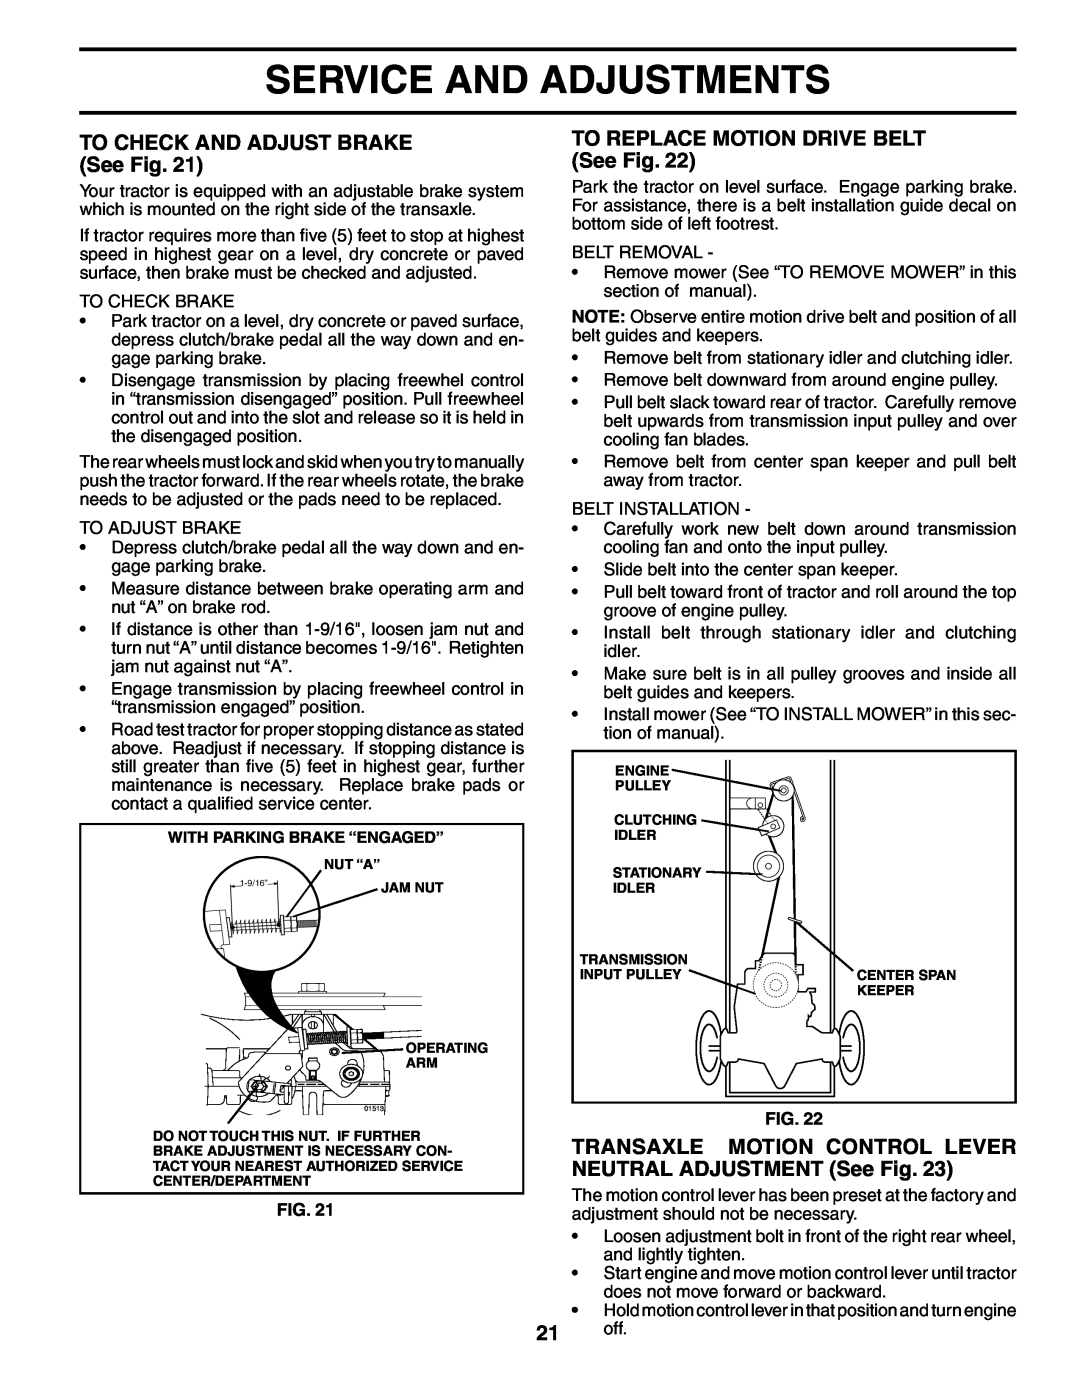 Poulan BB185H42YT manual TO CHECK AND ADJUST BRAKE See Fig, TO REPLACE MOTION DRIVE BELT See Fig, Service And Adjustments 